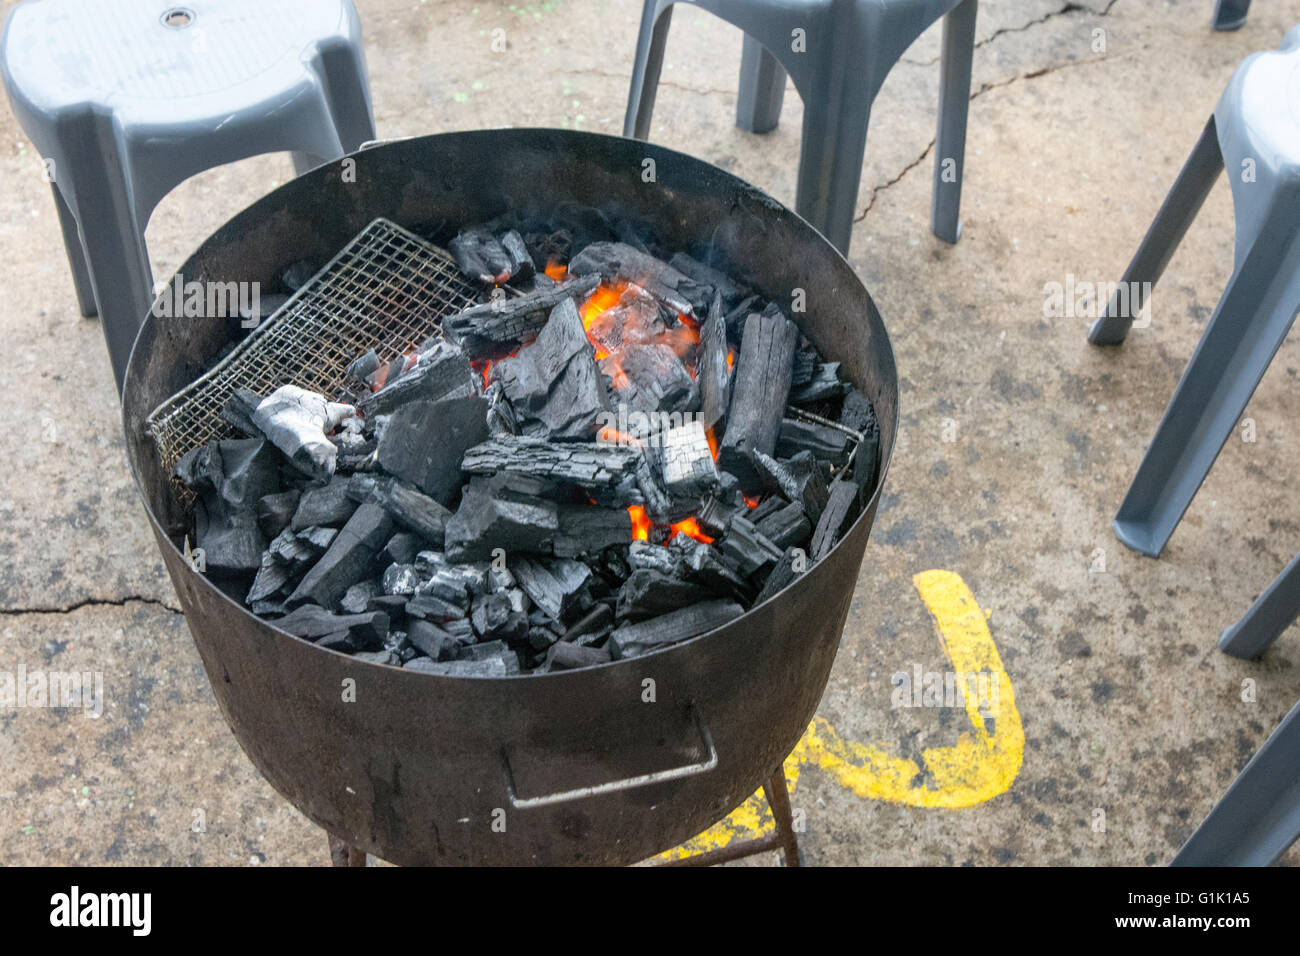 Outside Charcoal fire for cooking at a barbecue Stock Photo